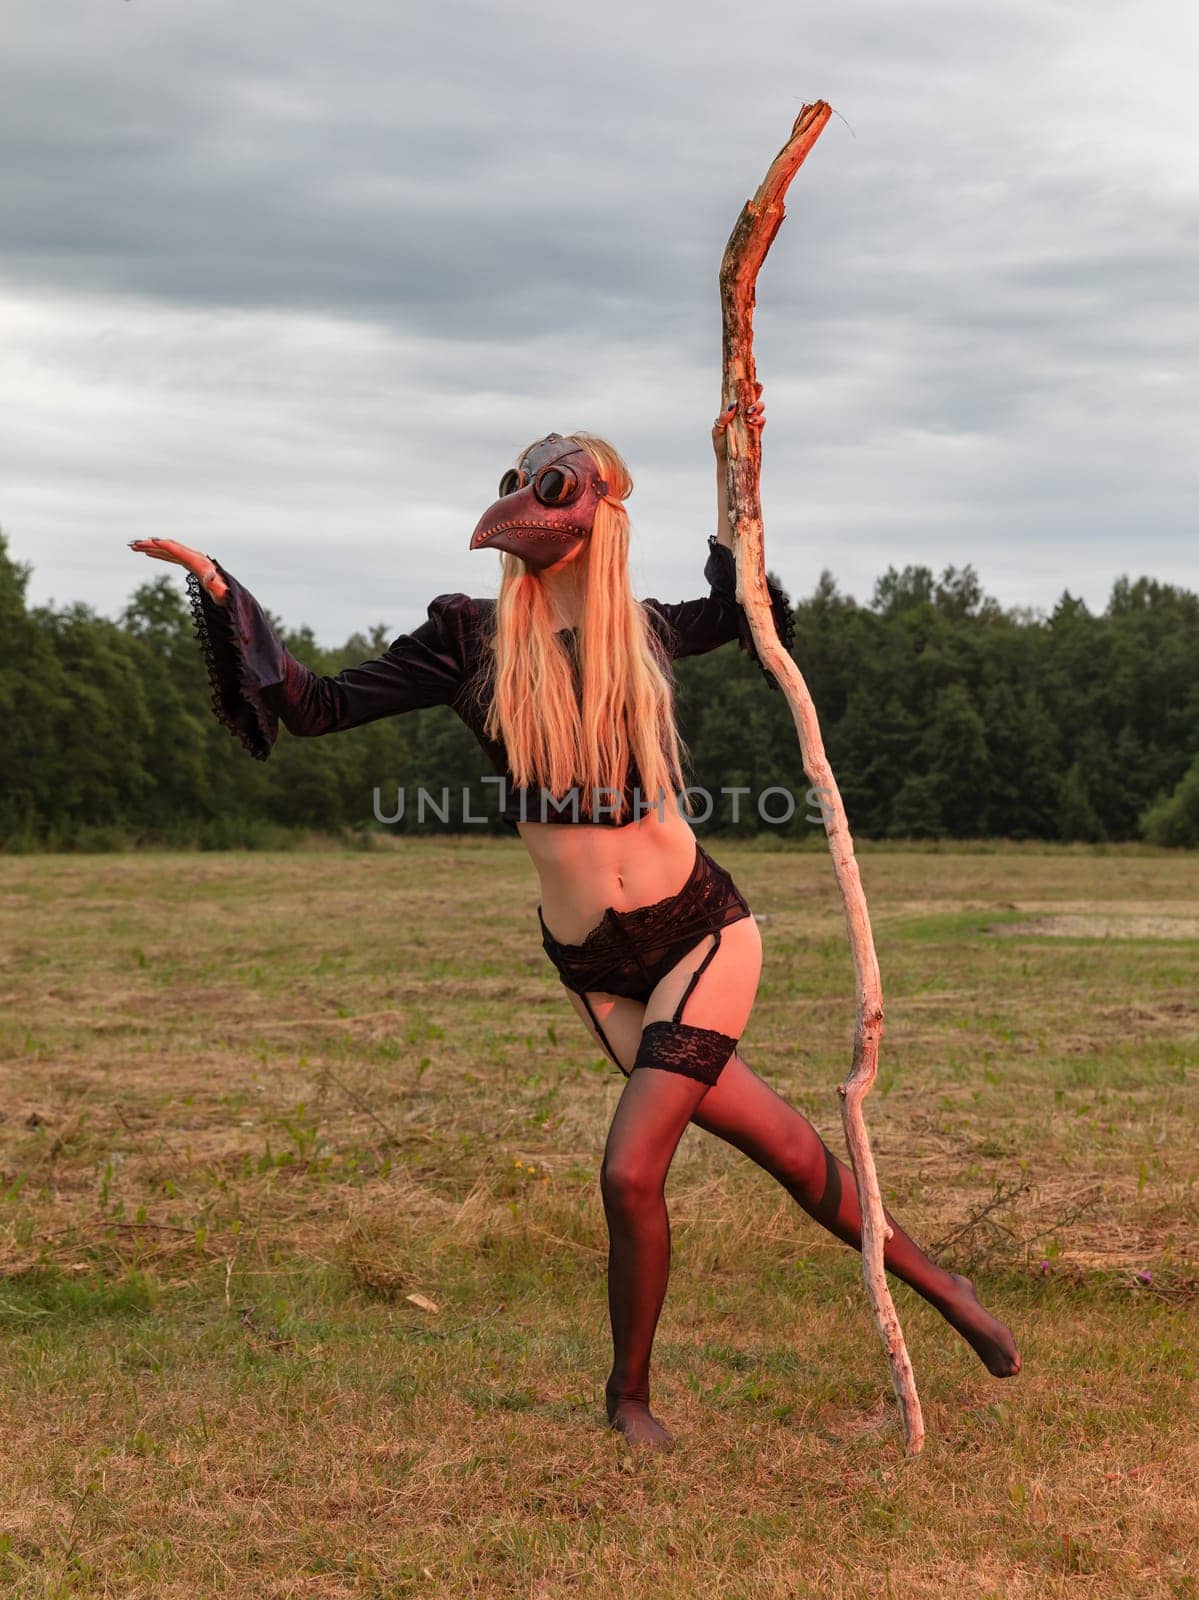 A young woman wearing a black raven mask poses with a dry tree branch in a serene countryside field.